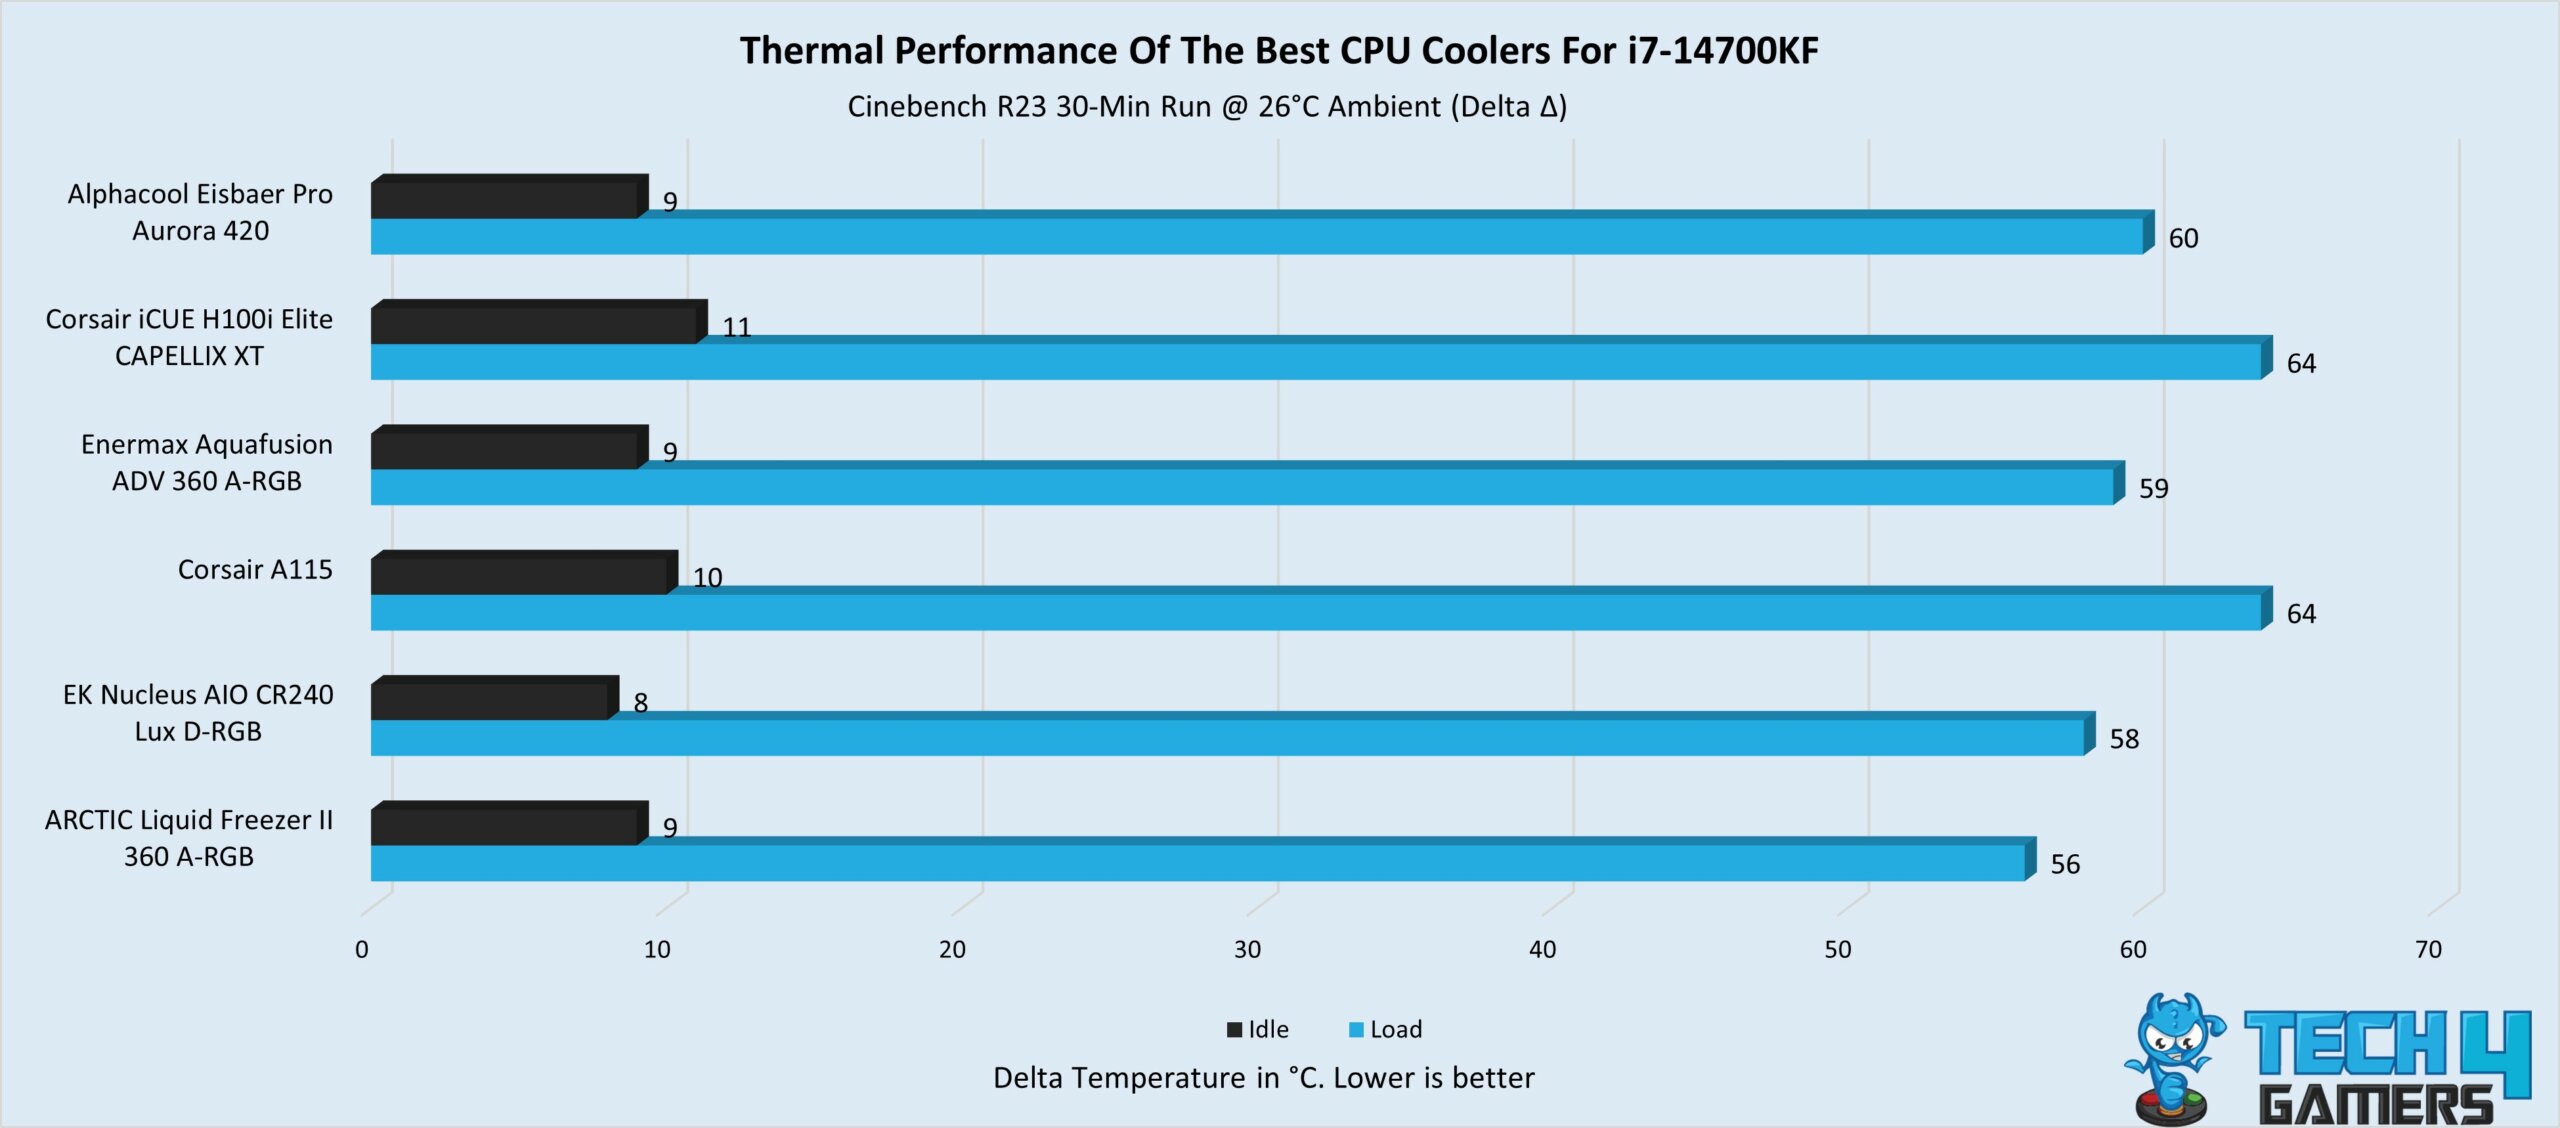 Thermal performance of CPU coolers for i7-14700KF